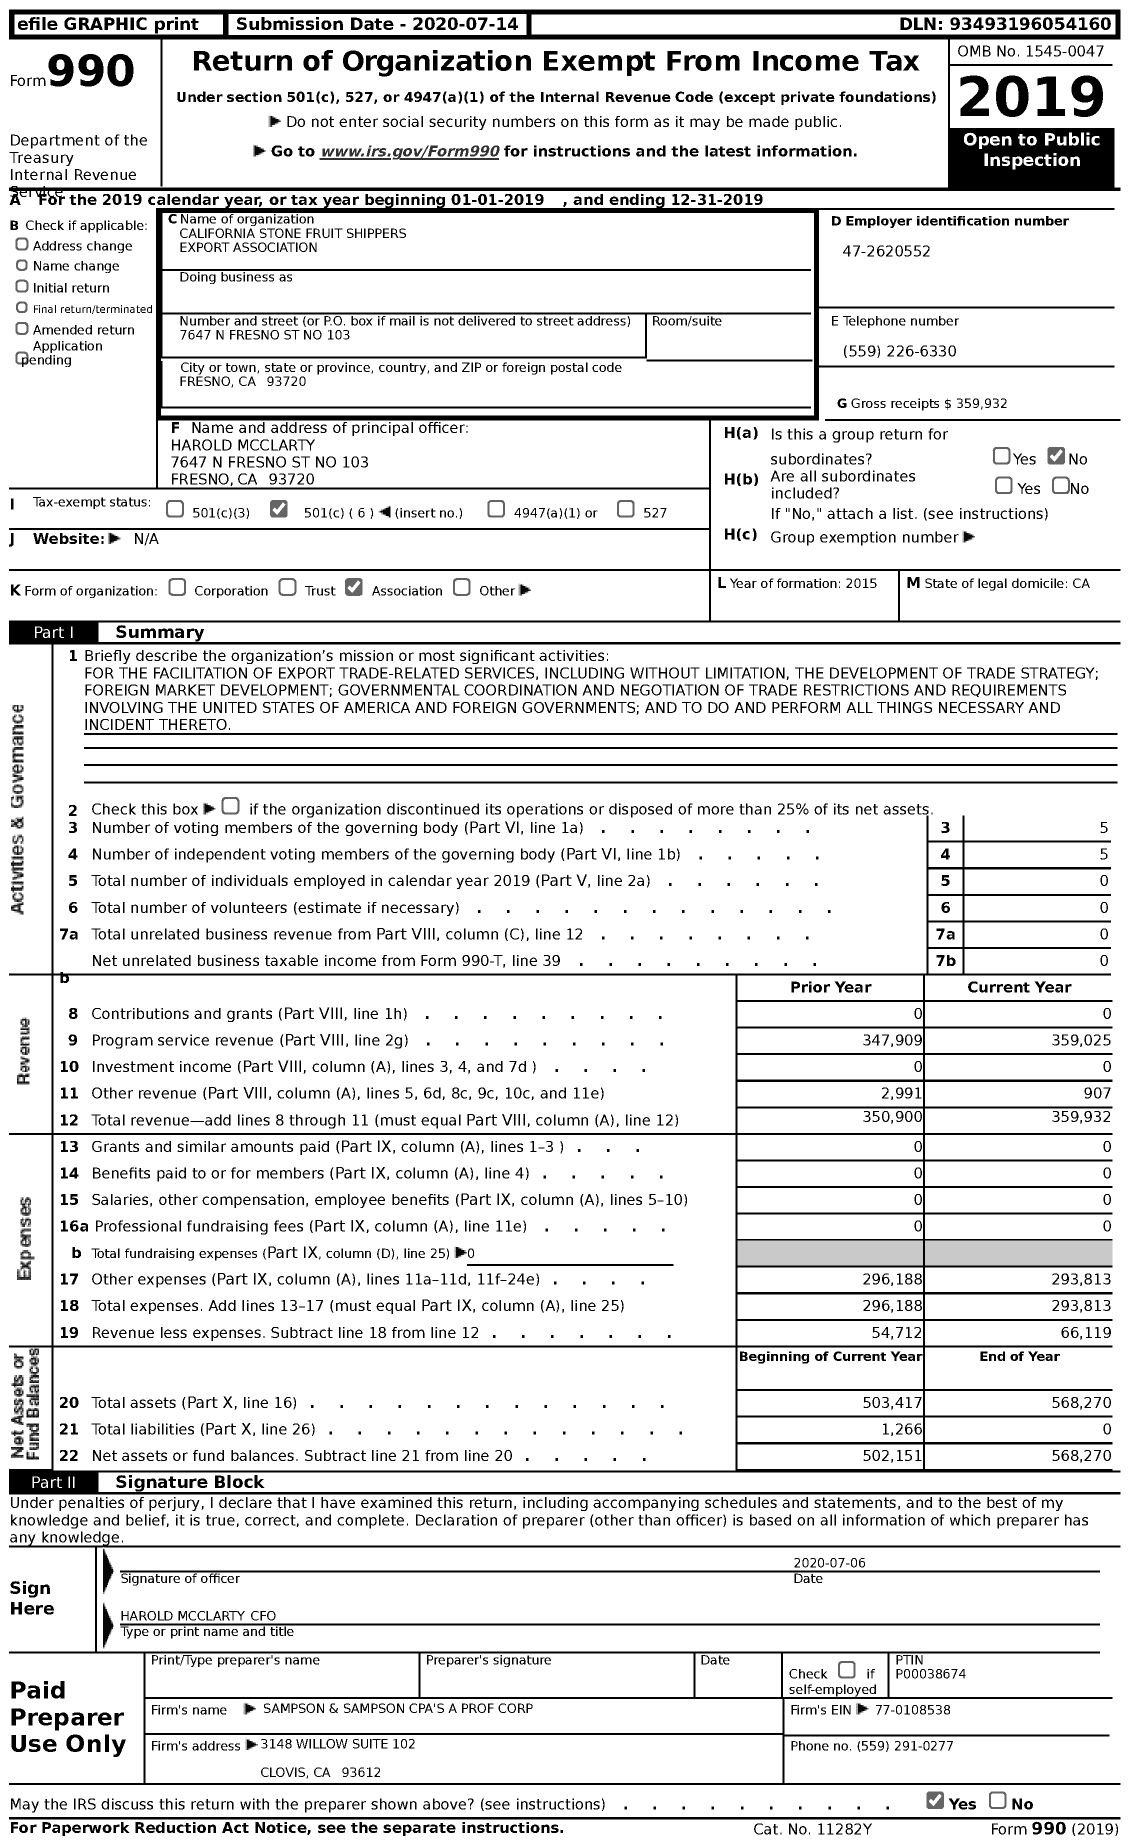 Image of first page of 2019 Form 990 for California Stone Fruit Shippers Export Association